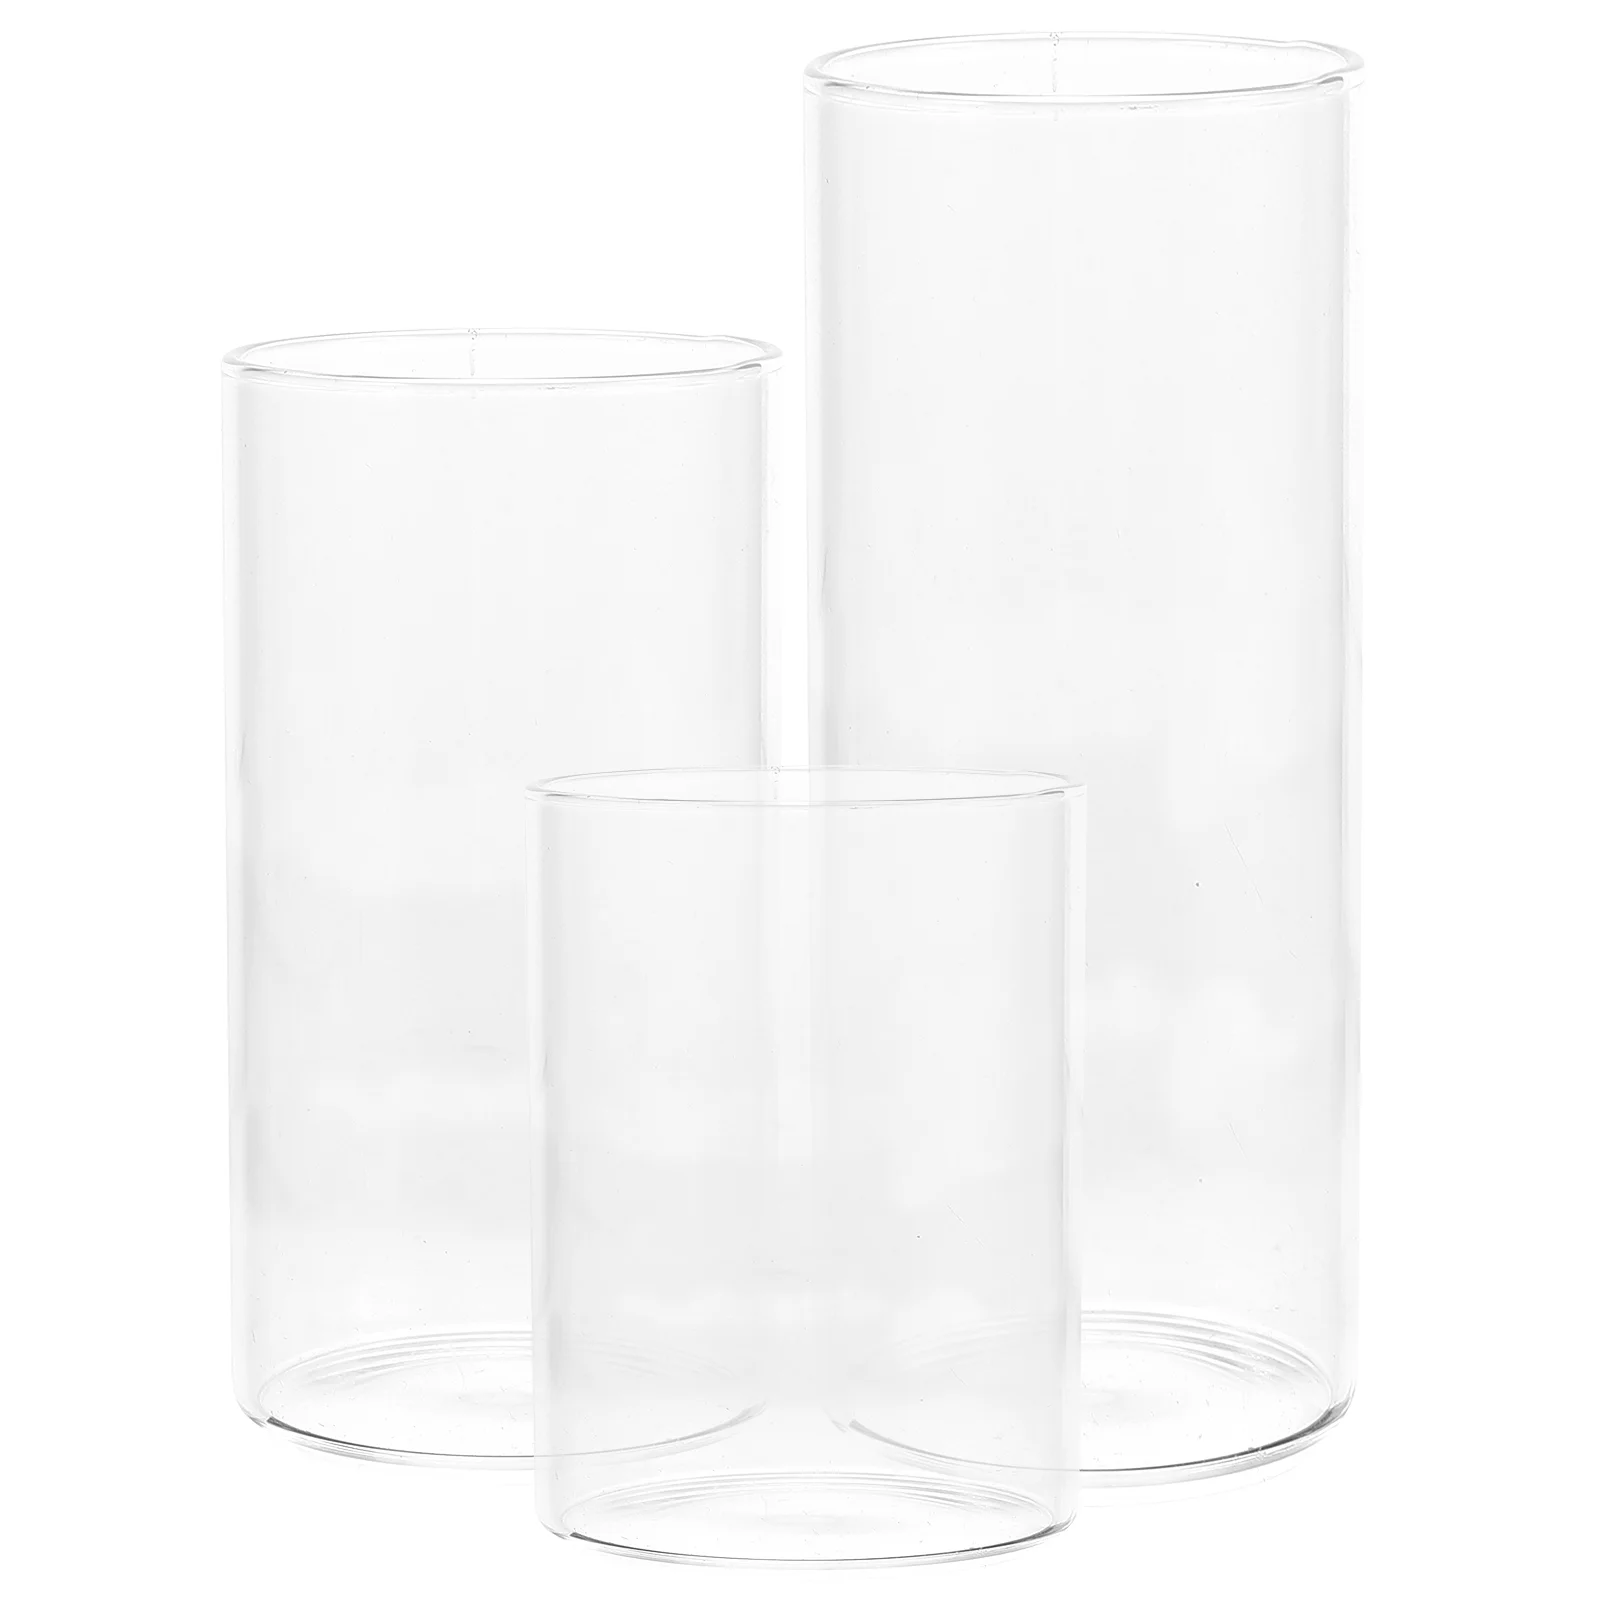 

3 Pcs Clear Glass Glass Cup Clear Household Shades Holders Jars Cylinder Pillar Candleholders